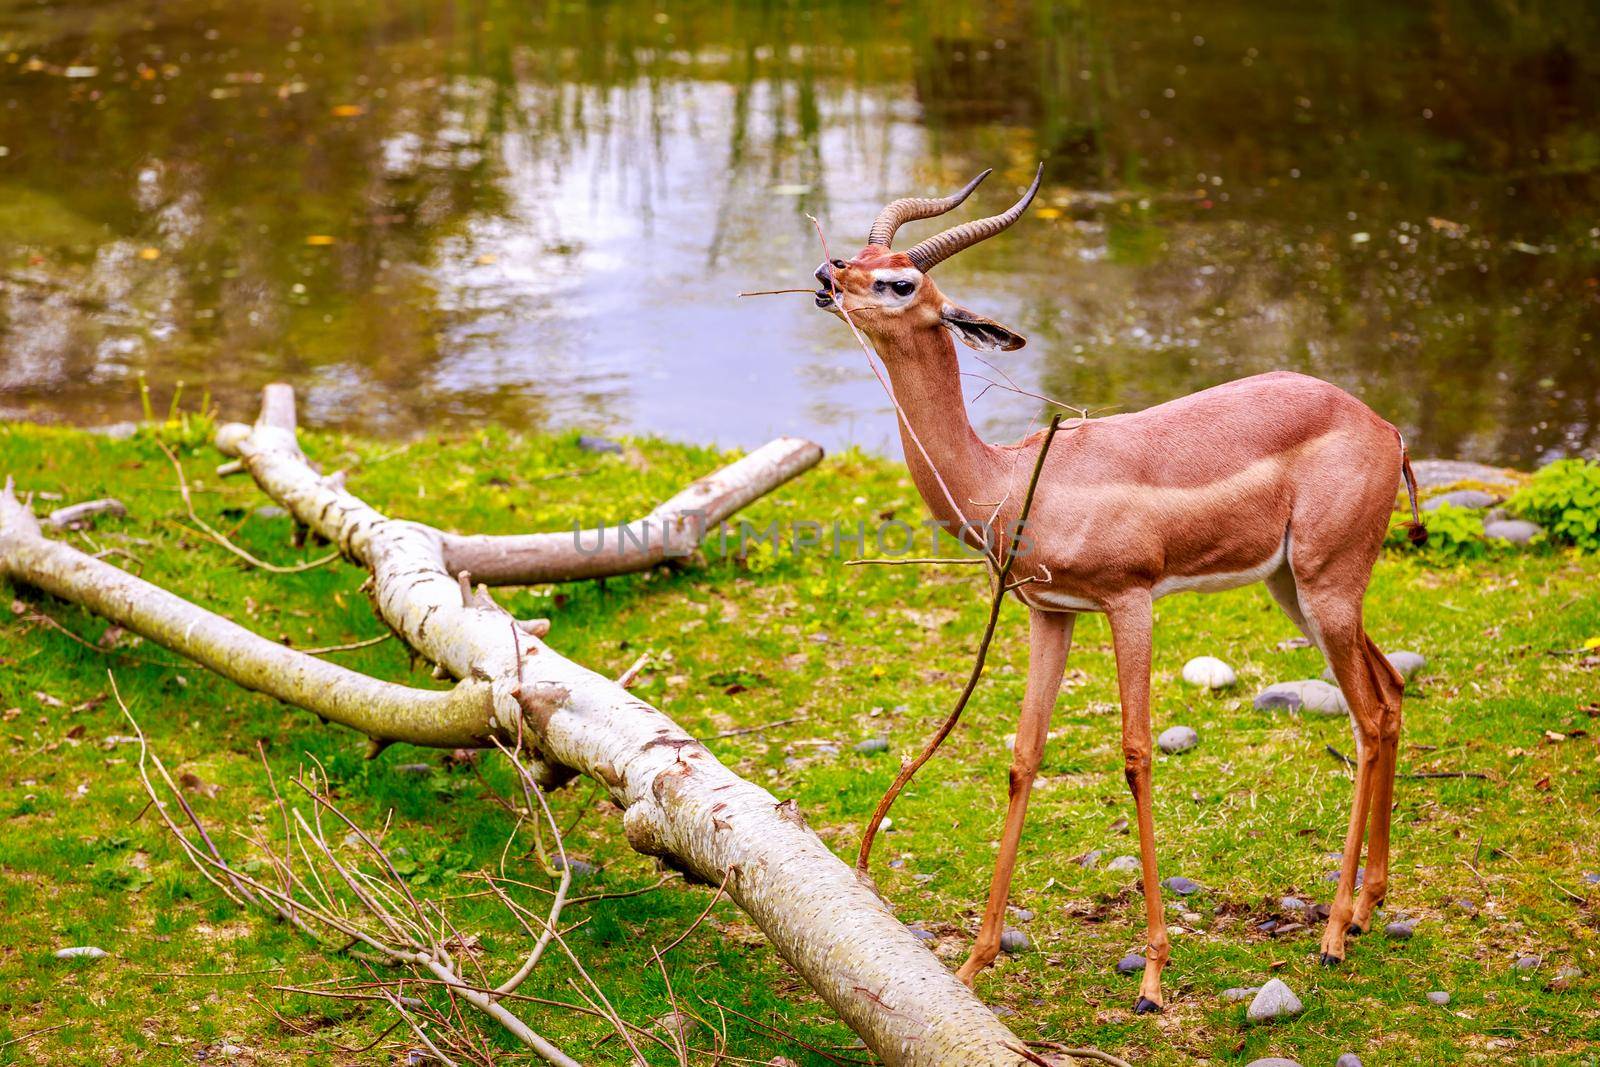 Speke's gazelle (Gazella spekei), the smallest of the gazelle species from the Horn of Africa, feeds on a small tree branch.